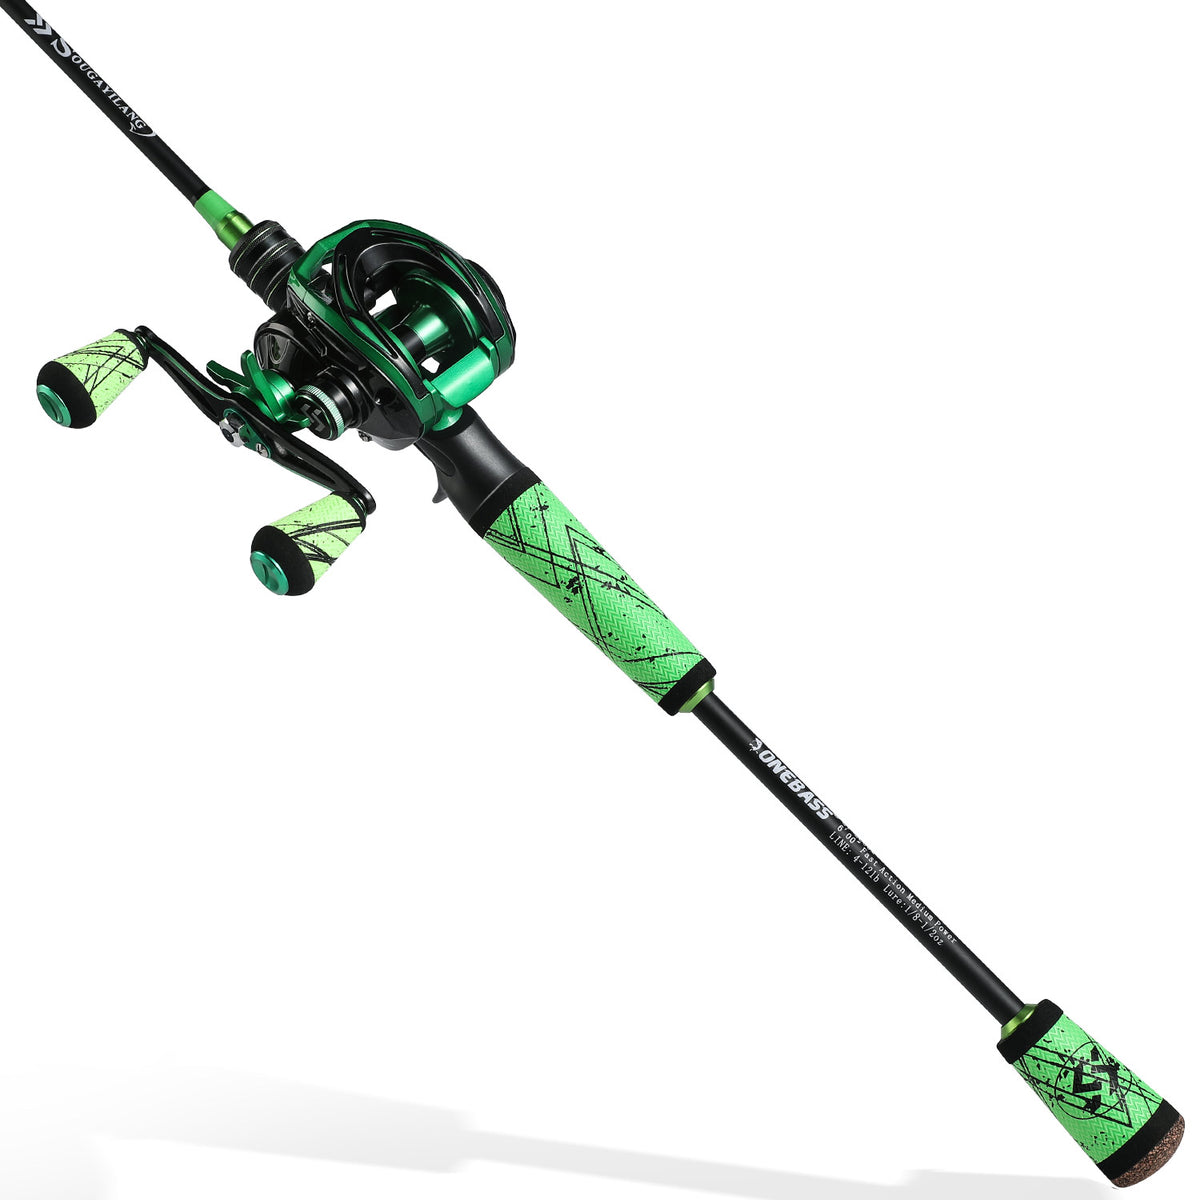 One Bass Fishing Rod and Reel Combo, IM7 Graphite 2 Pc Blank Baitcasting  Combo, Spinning Rod with Super Polymer Handle, Rod & Reel Combos 